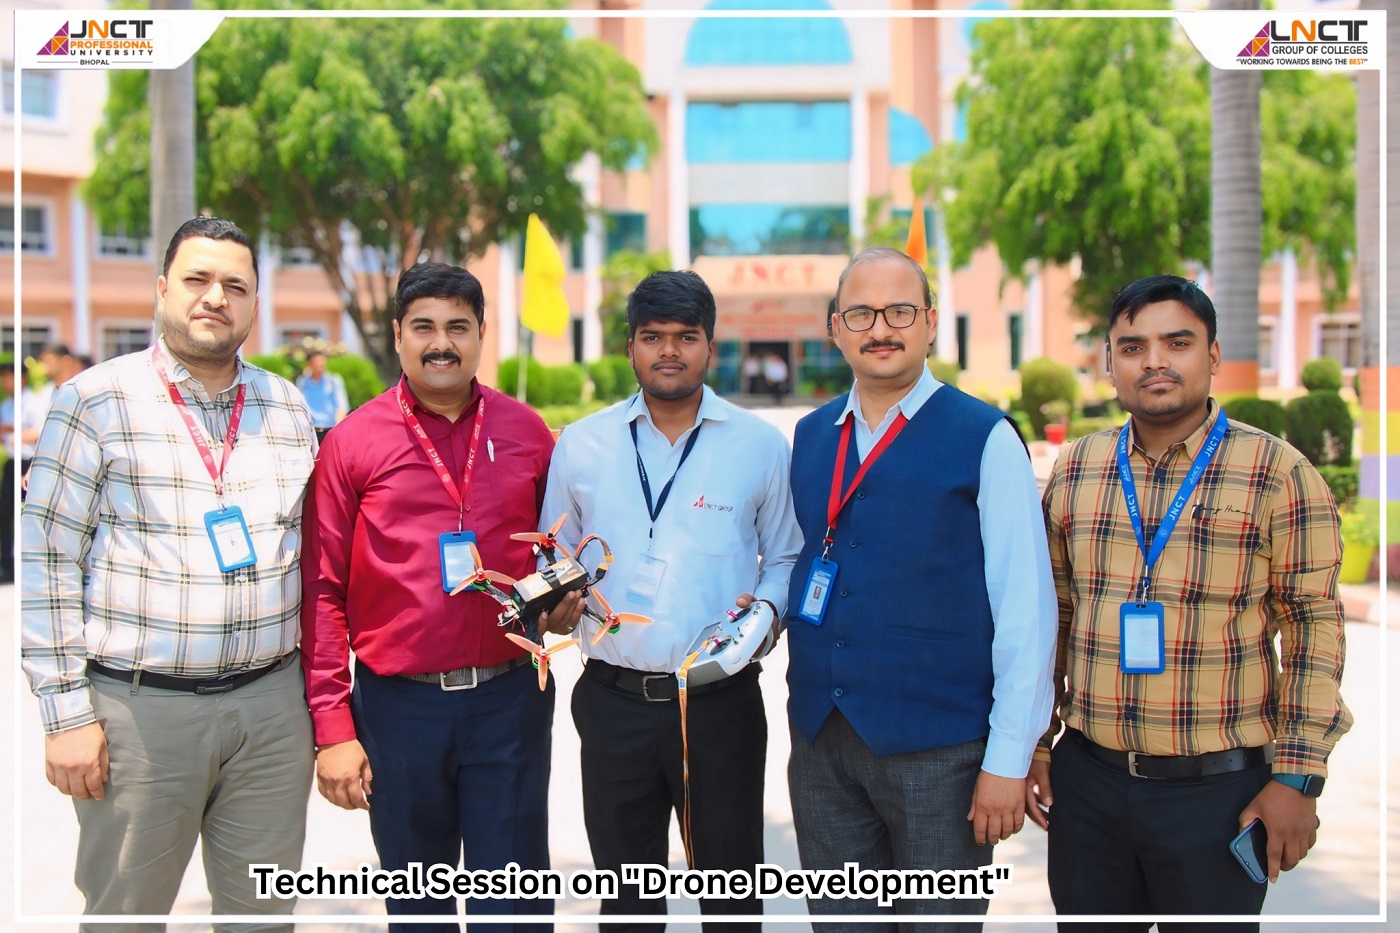 Technical Session on *“Drone Development”* organized by the Department of Electronics & Communication.